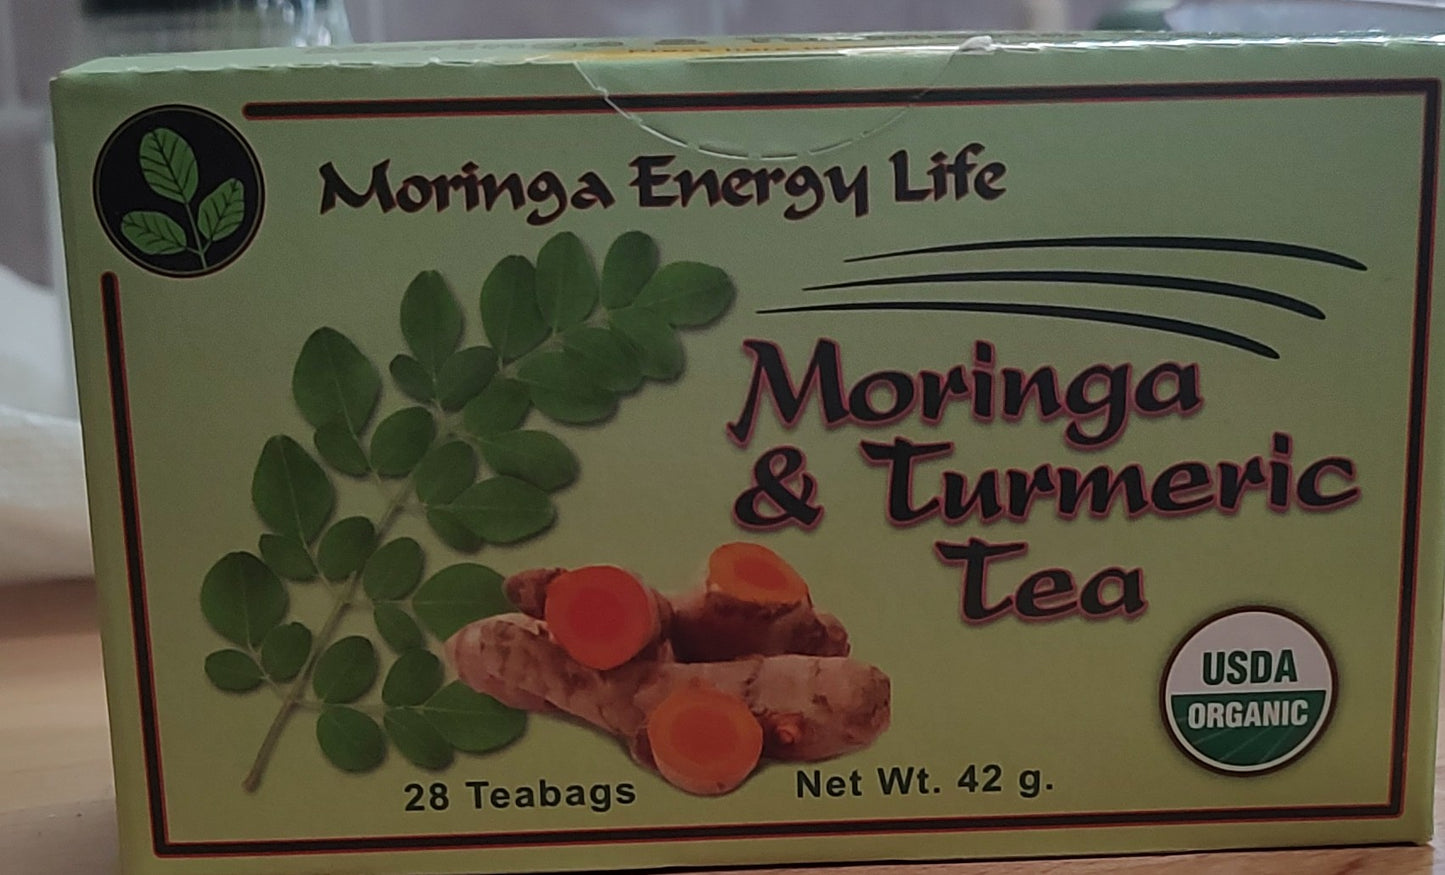 Blueberry Moringa Tea. One cup at a time